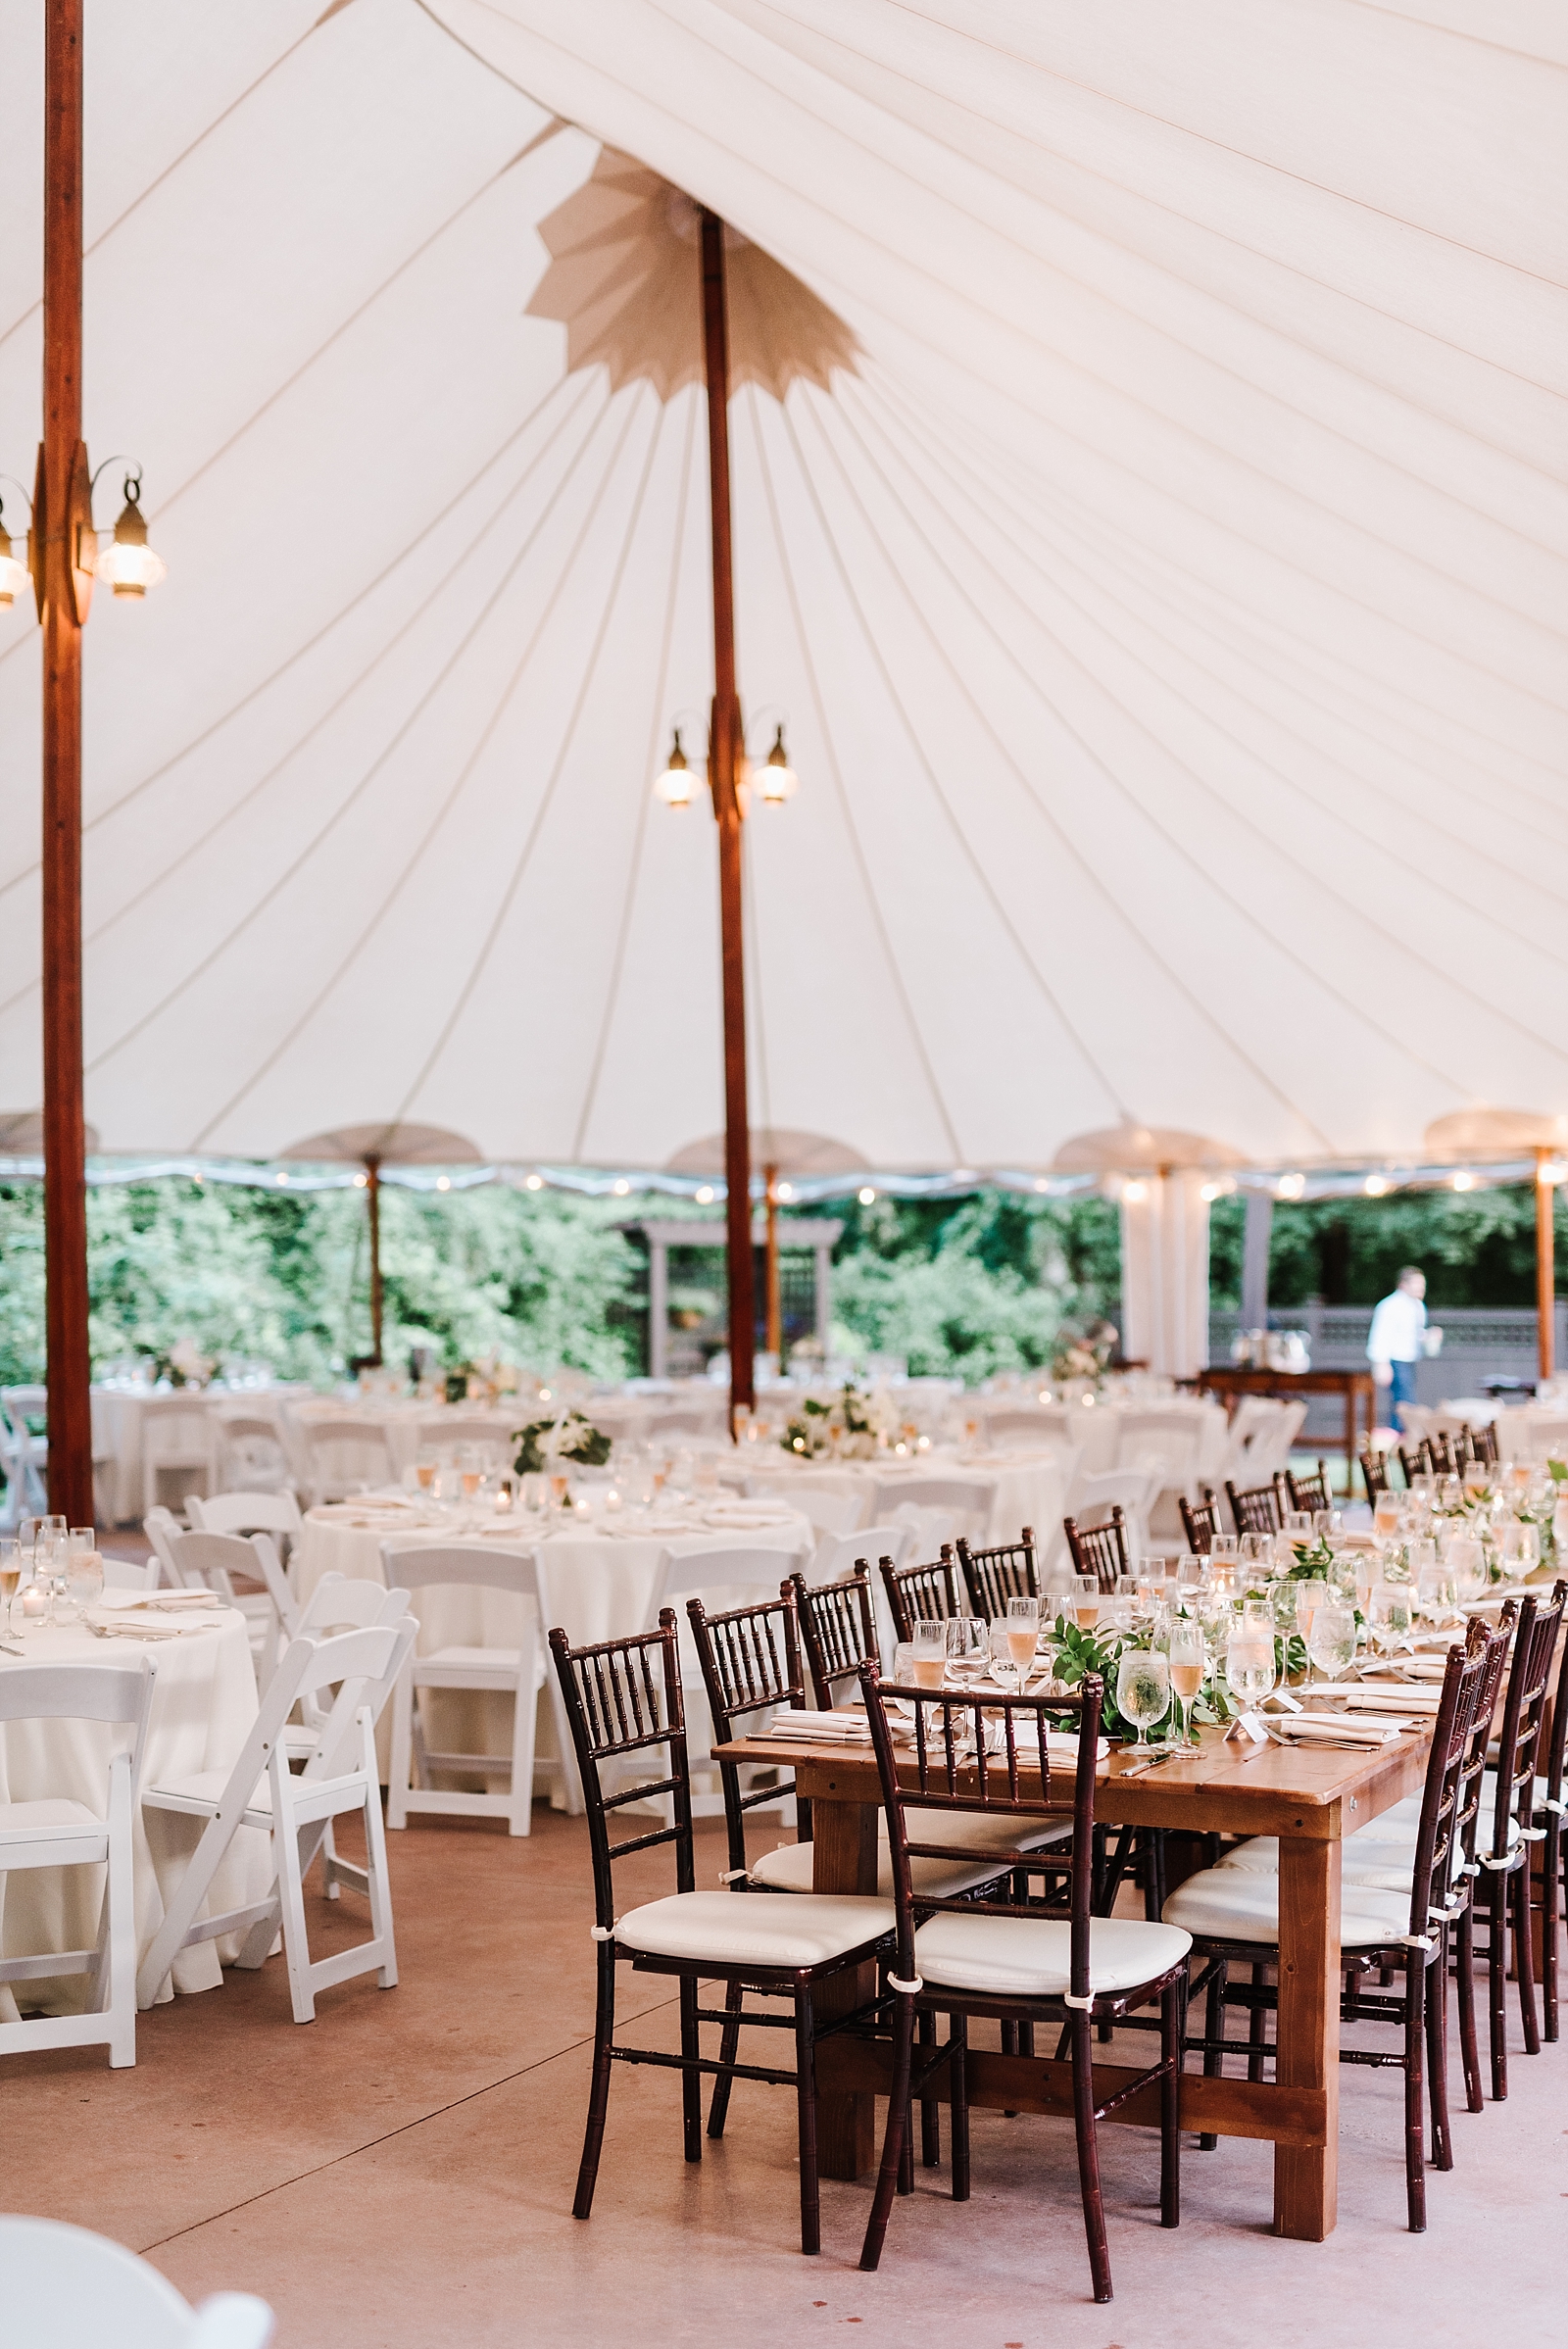 Sunny Summer Wedding at Willowdale Estate in Topsfield, MA by Boston Wedding Photographer Annmarie Swift